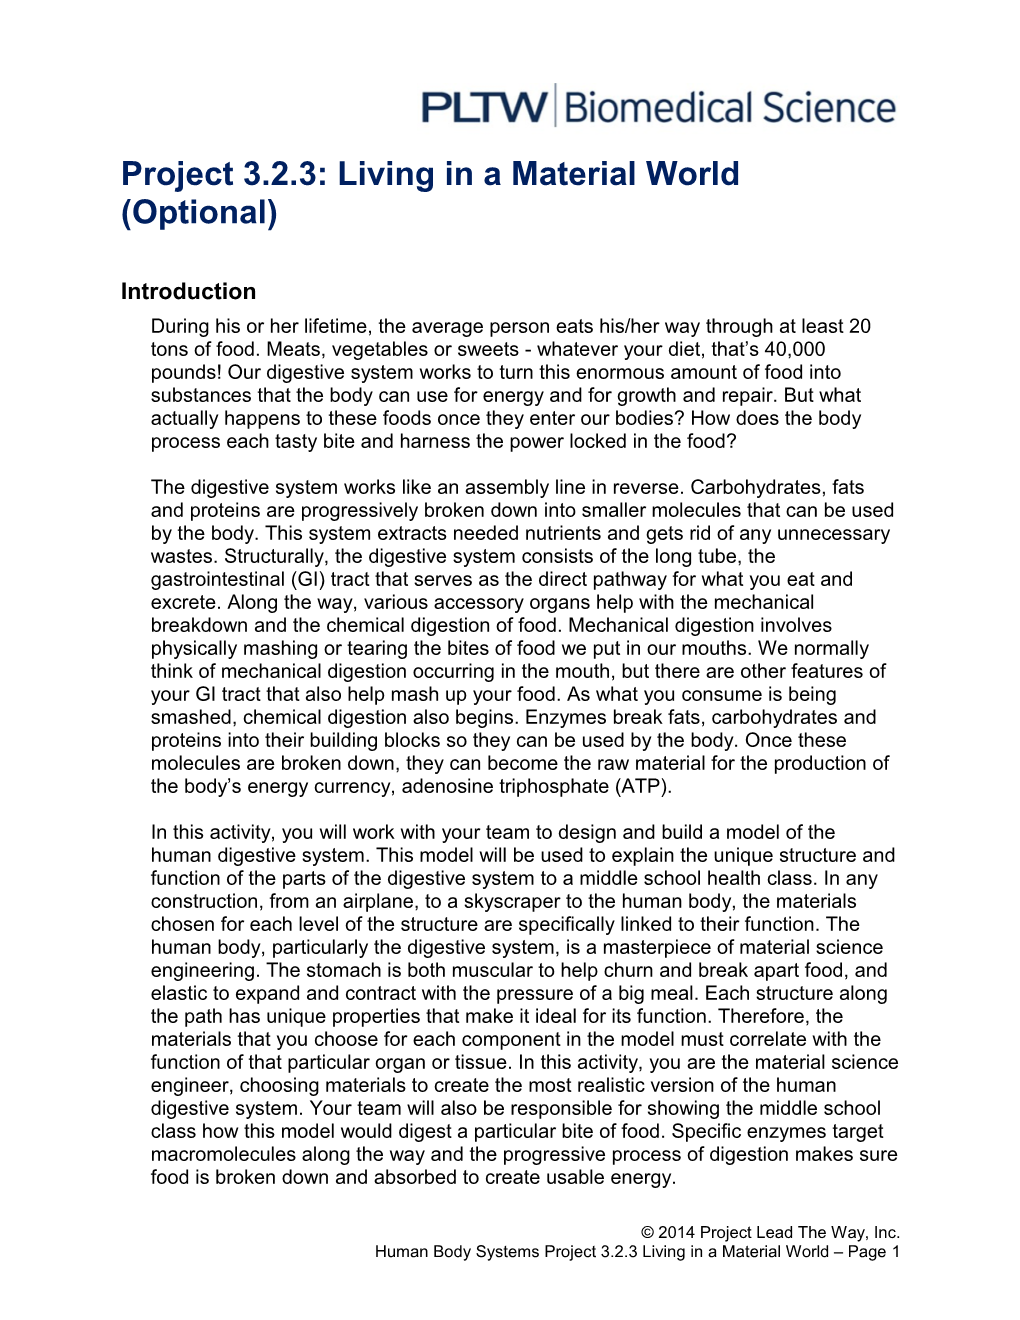 Project 3.2.3: Living in a Material World (Optional)